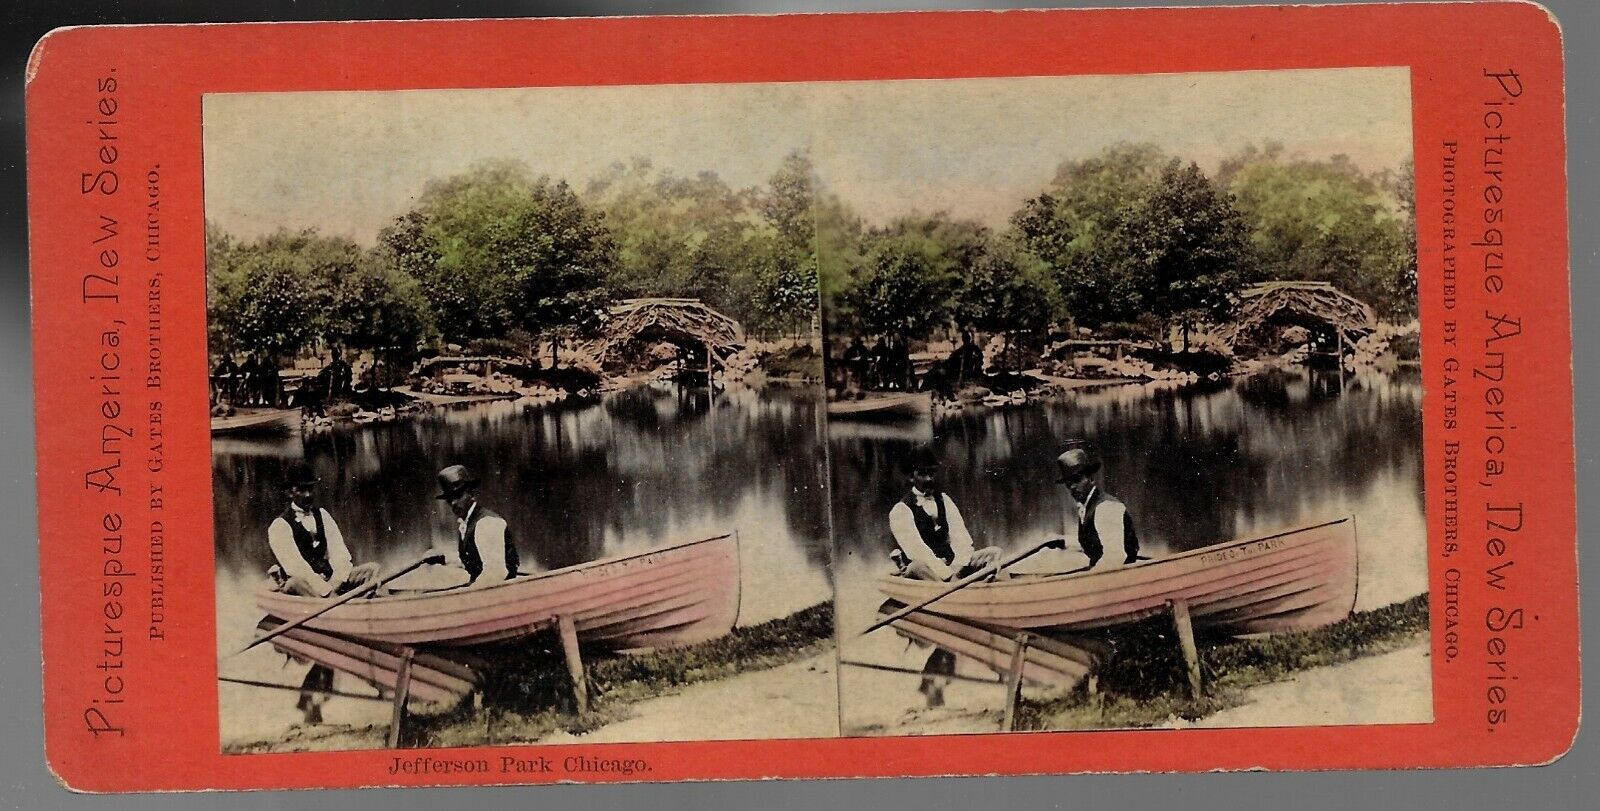 Jefferson Park Chicago - Pride of the Park Row Boat Color Photo Stereoview